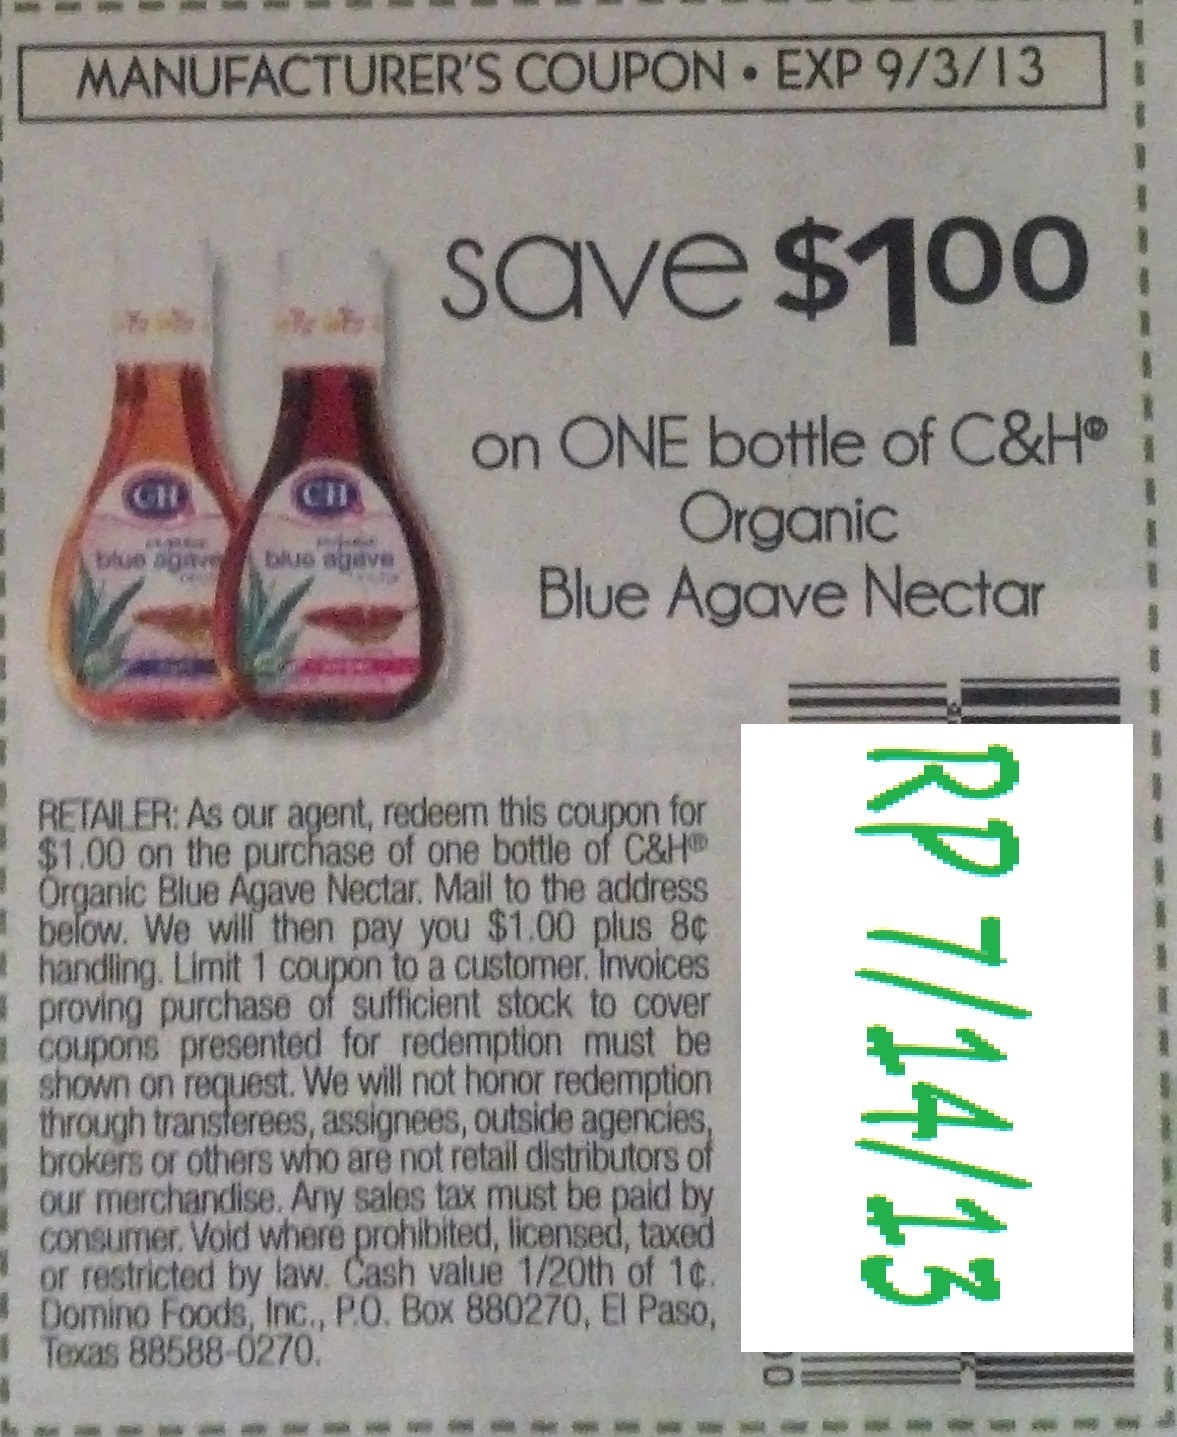 Save $1.00 on one bottle of C&H Organic Blue Agave Nectar Expires 09-03-2013